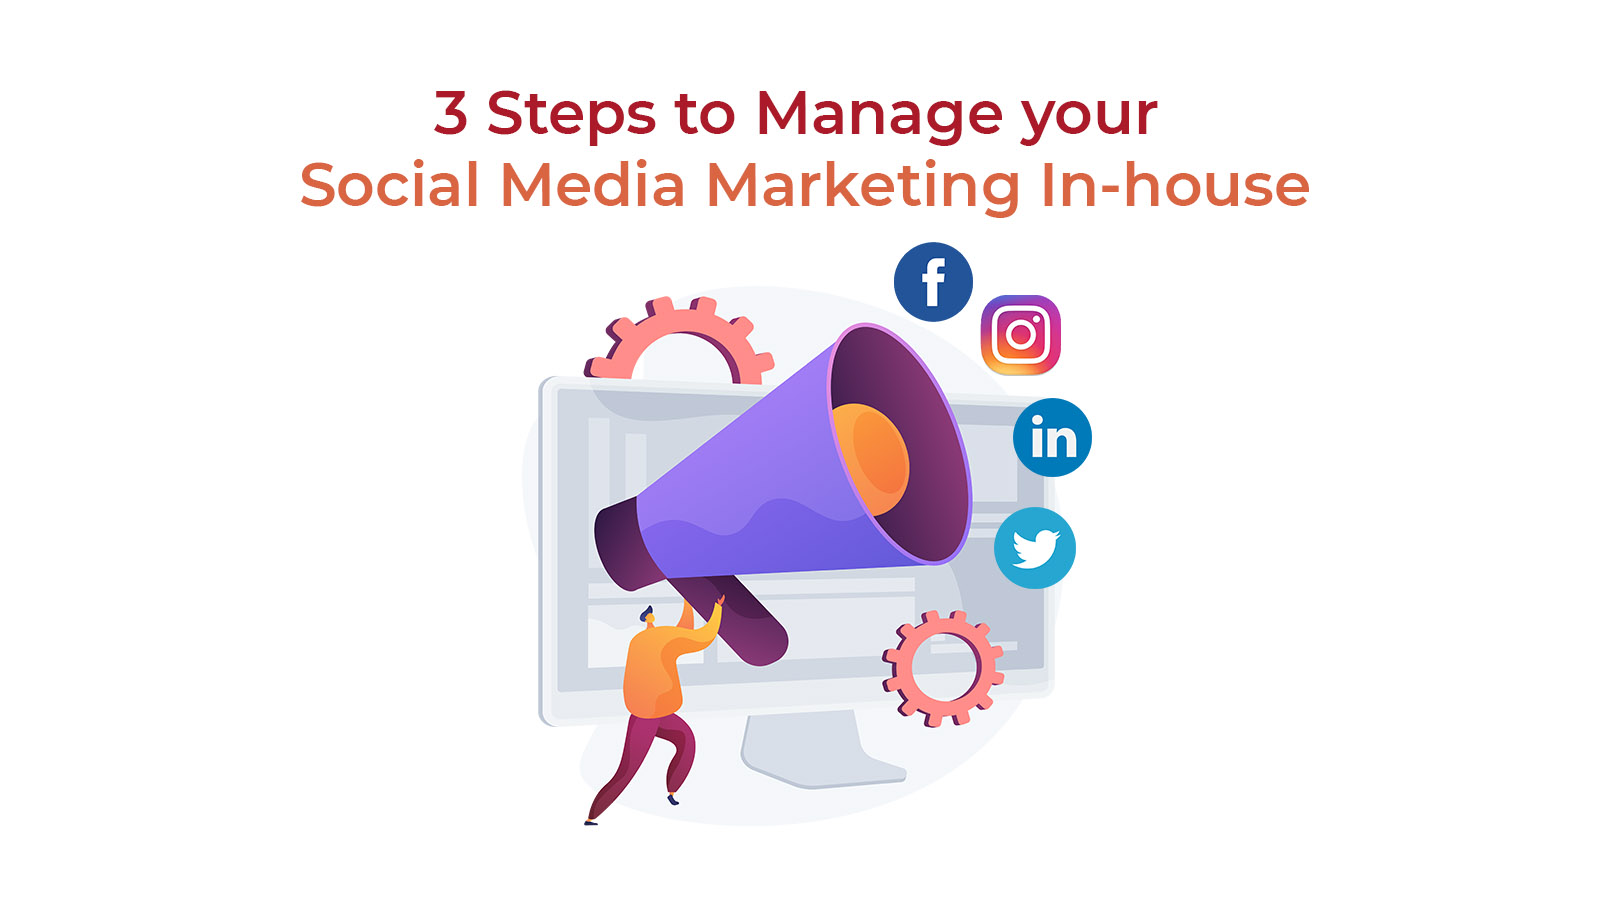 3 Steps to Manage your Social Media Marketing In-house